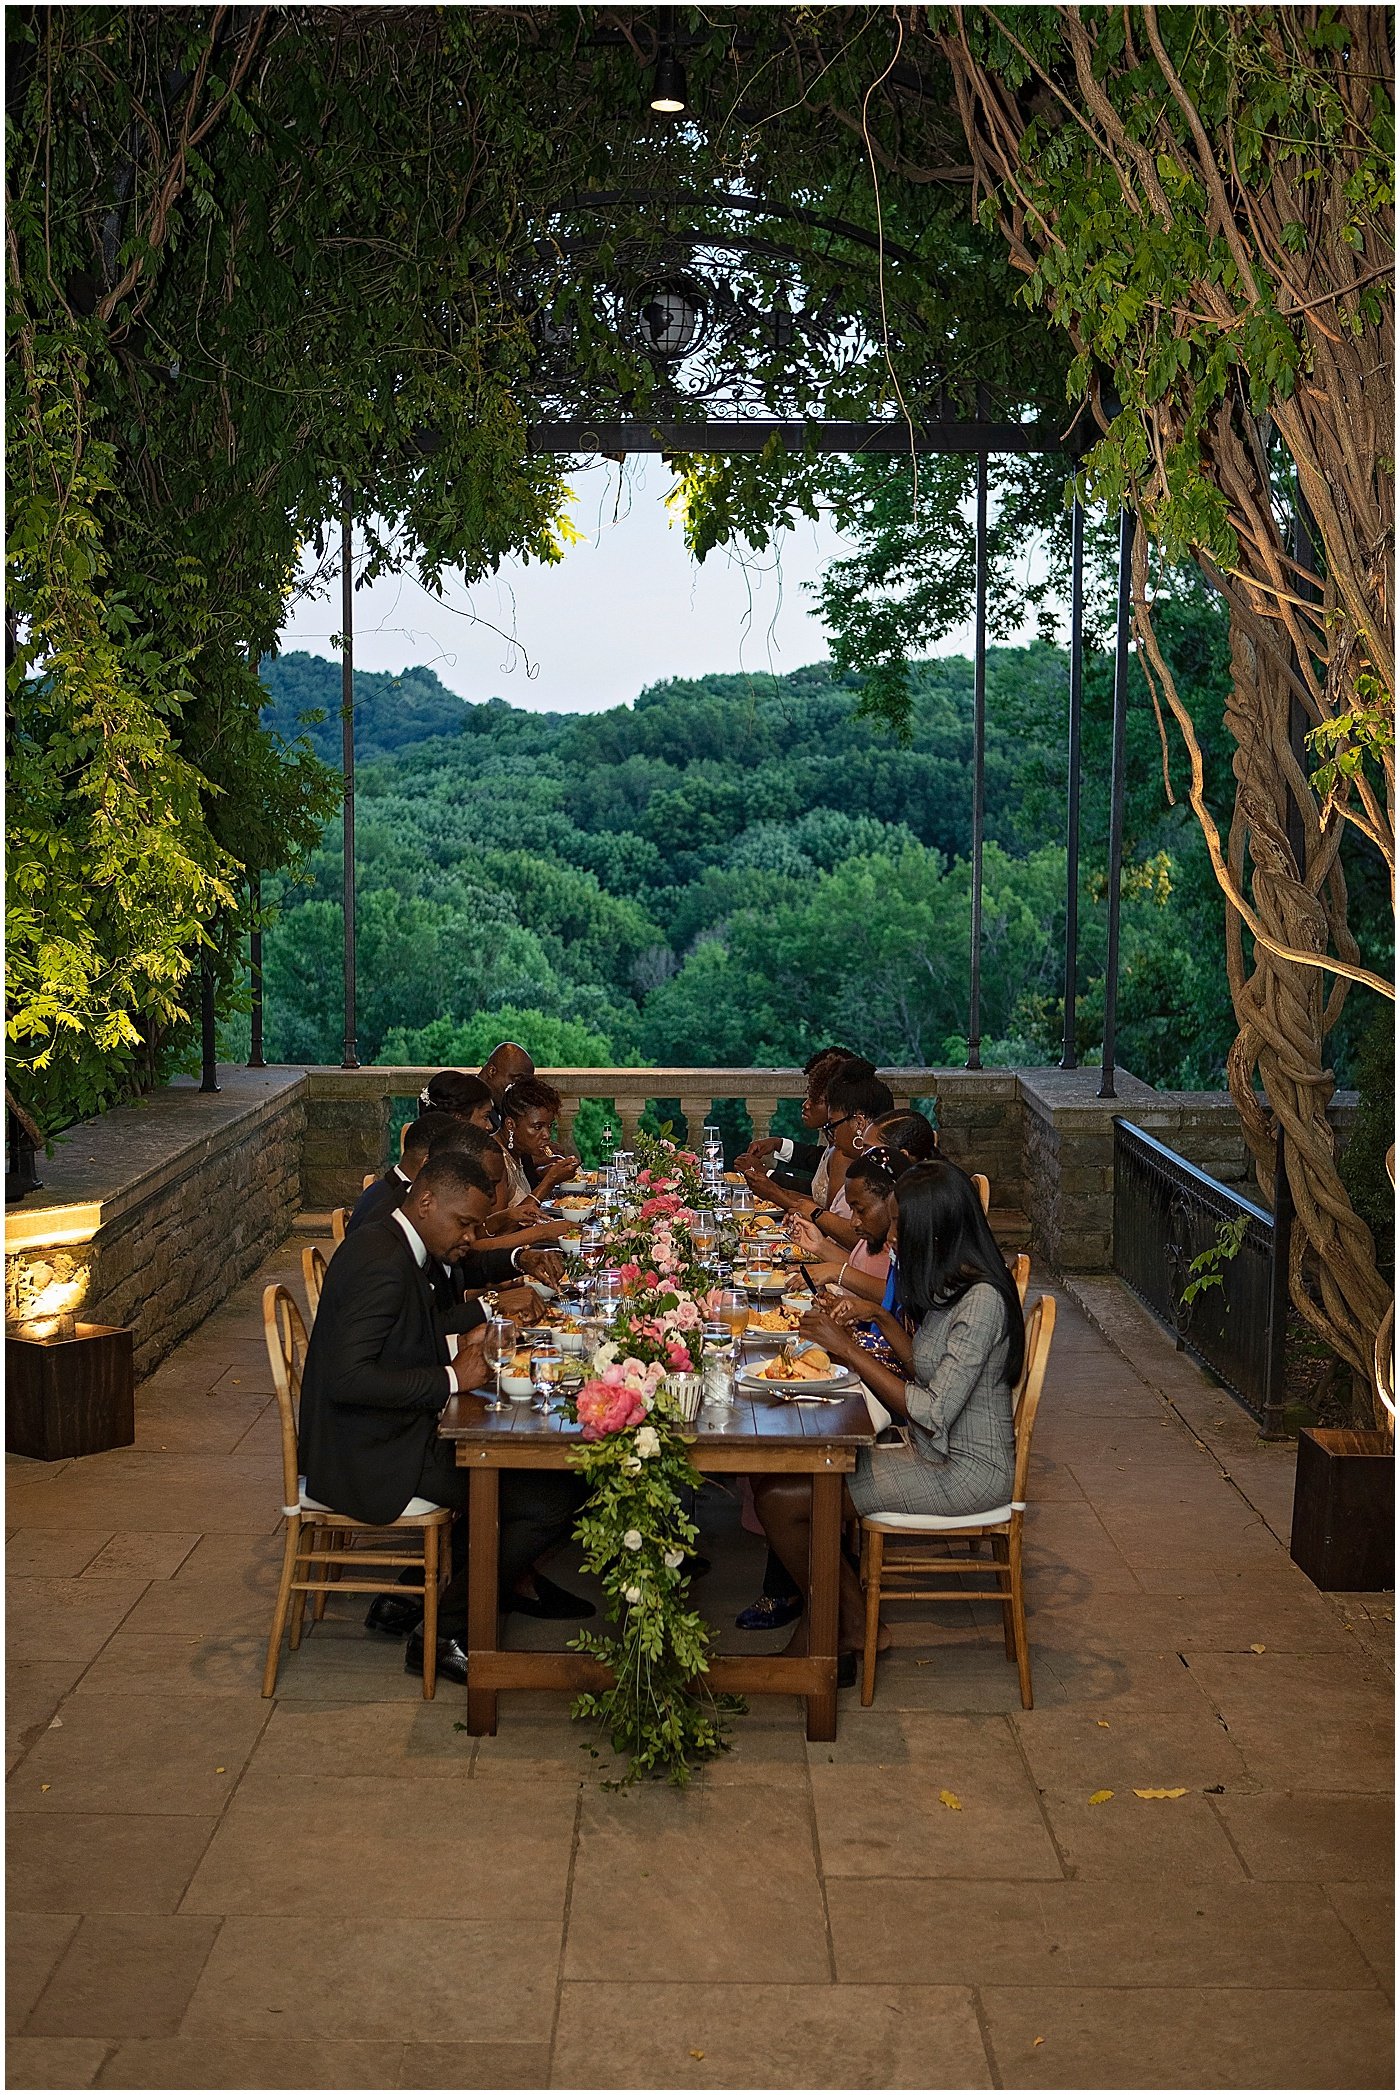 Dining under the wisteria arbor venue for their Cheekwood Estate and Garden Wedding